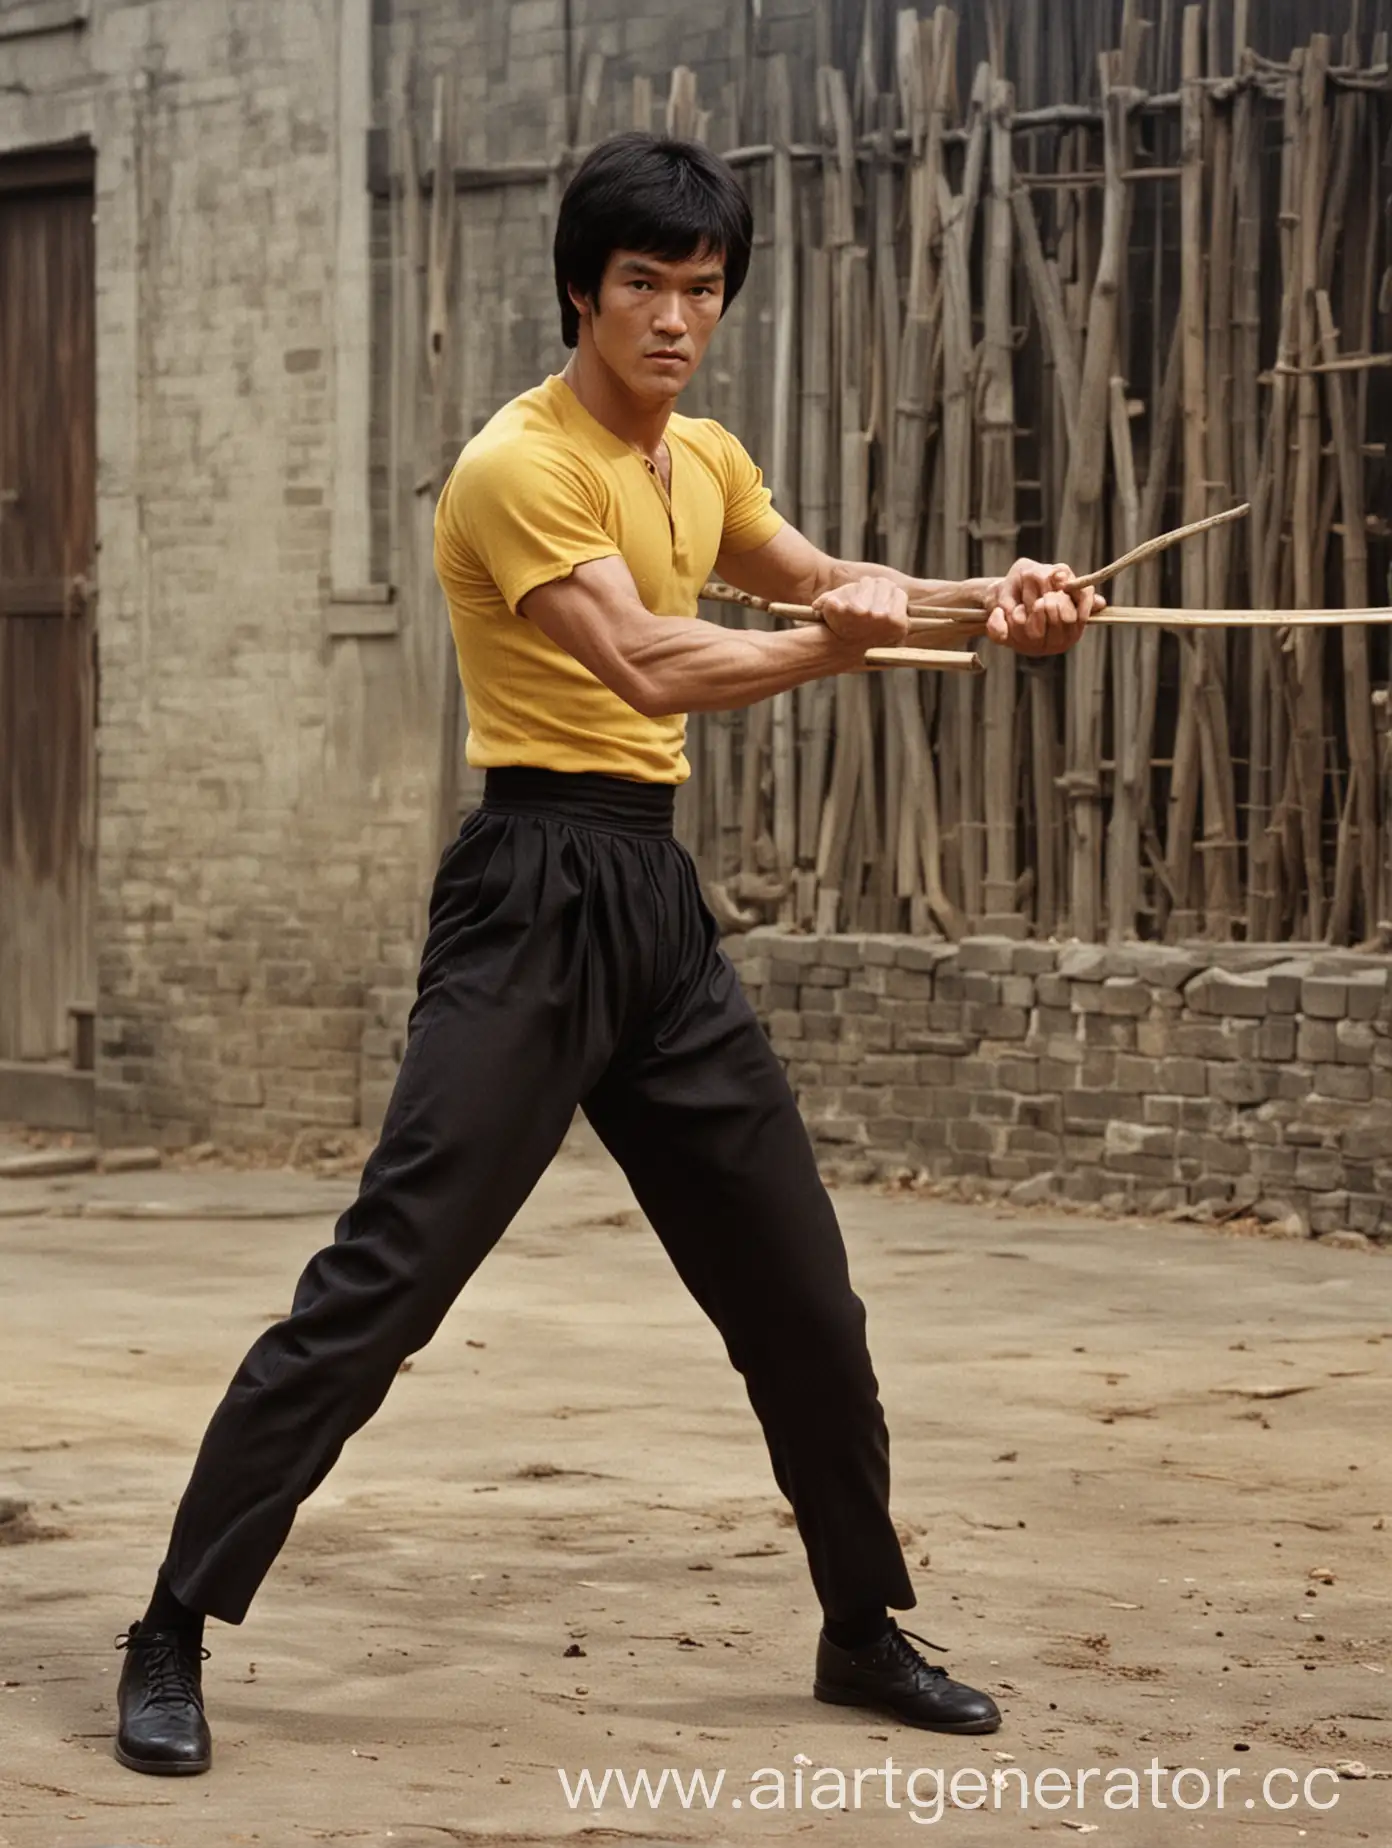 Bruce-Lee-Defends-Against-Enemies-with-a-Long-Stick